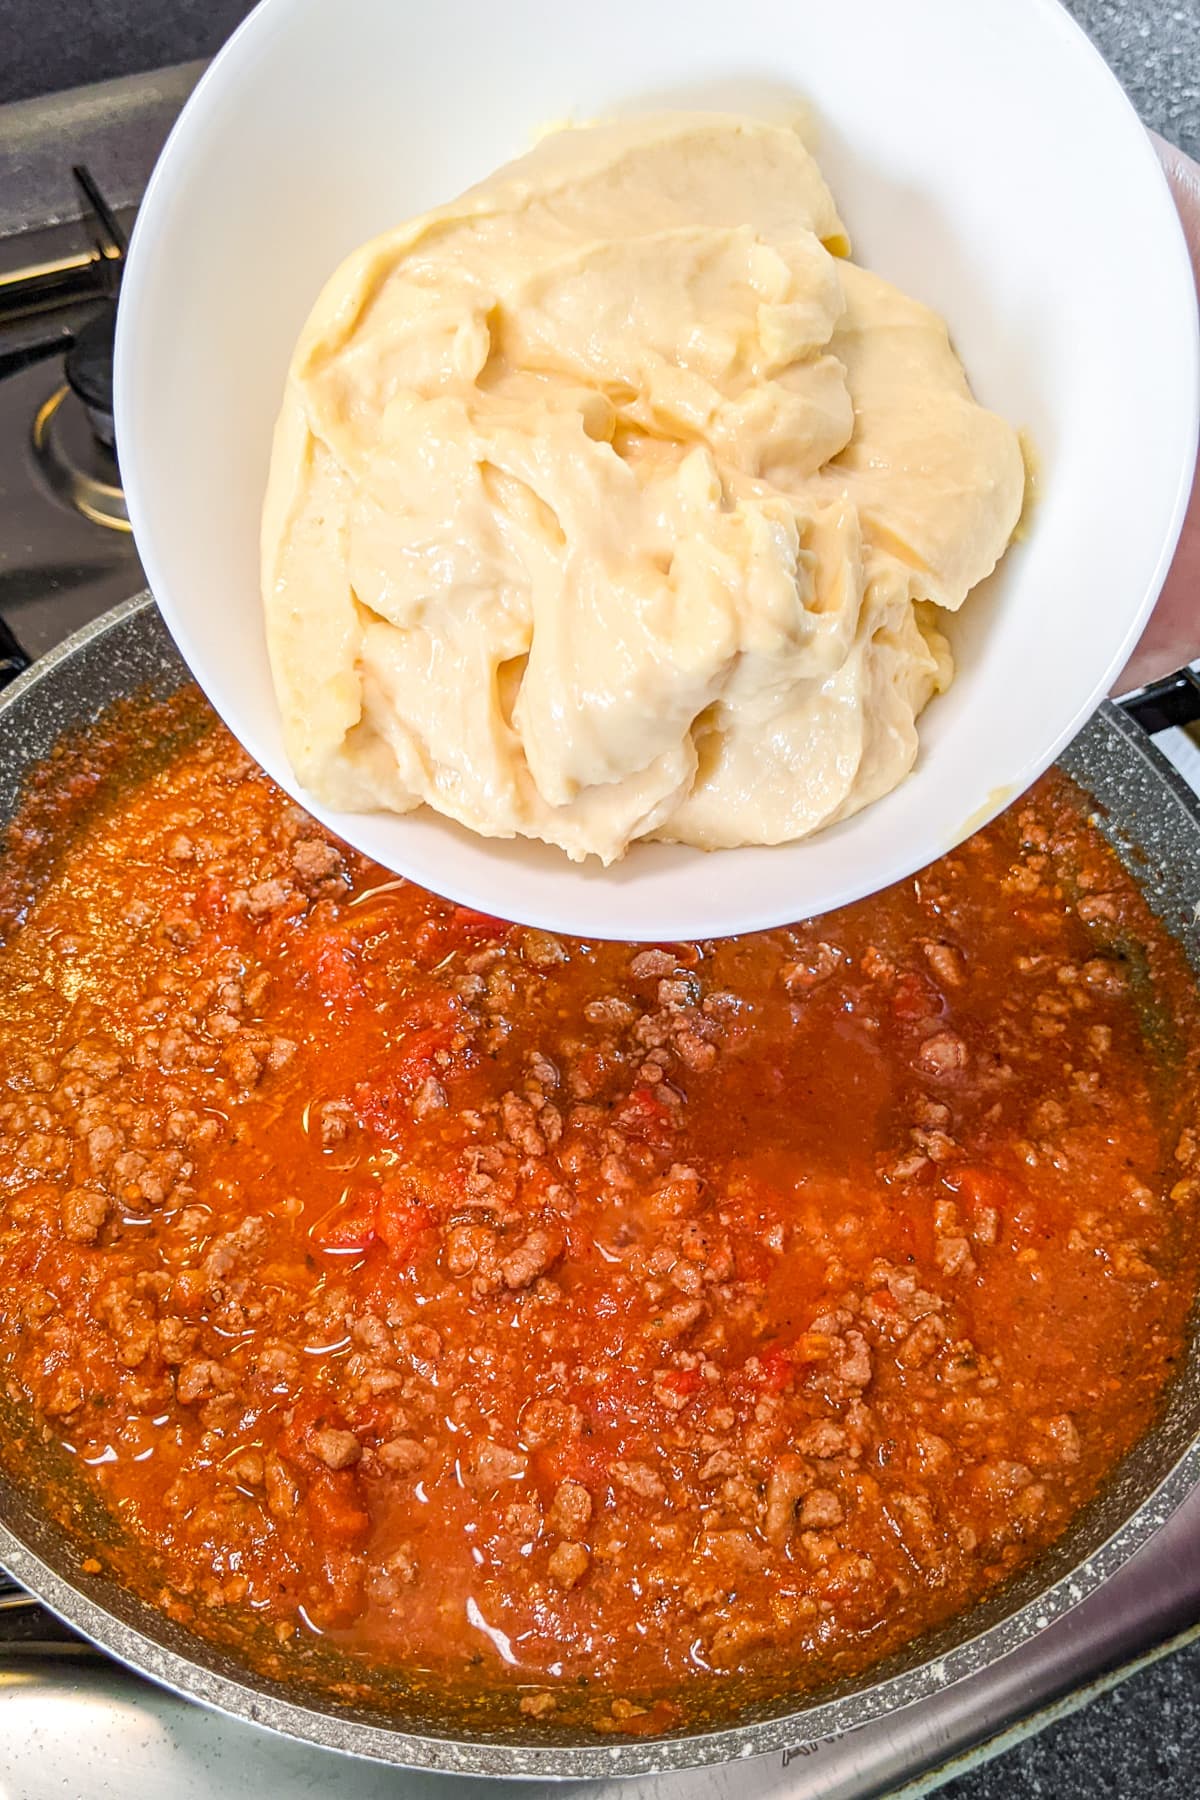 Pouring cheese sauce over fried ground beef in tomato sauce.